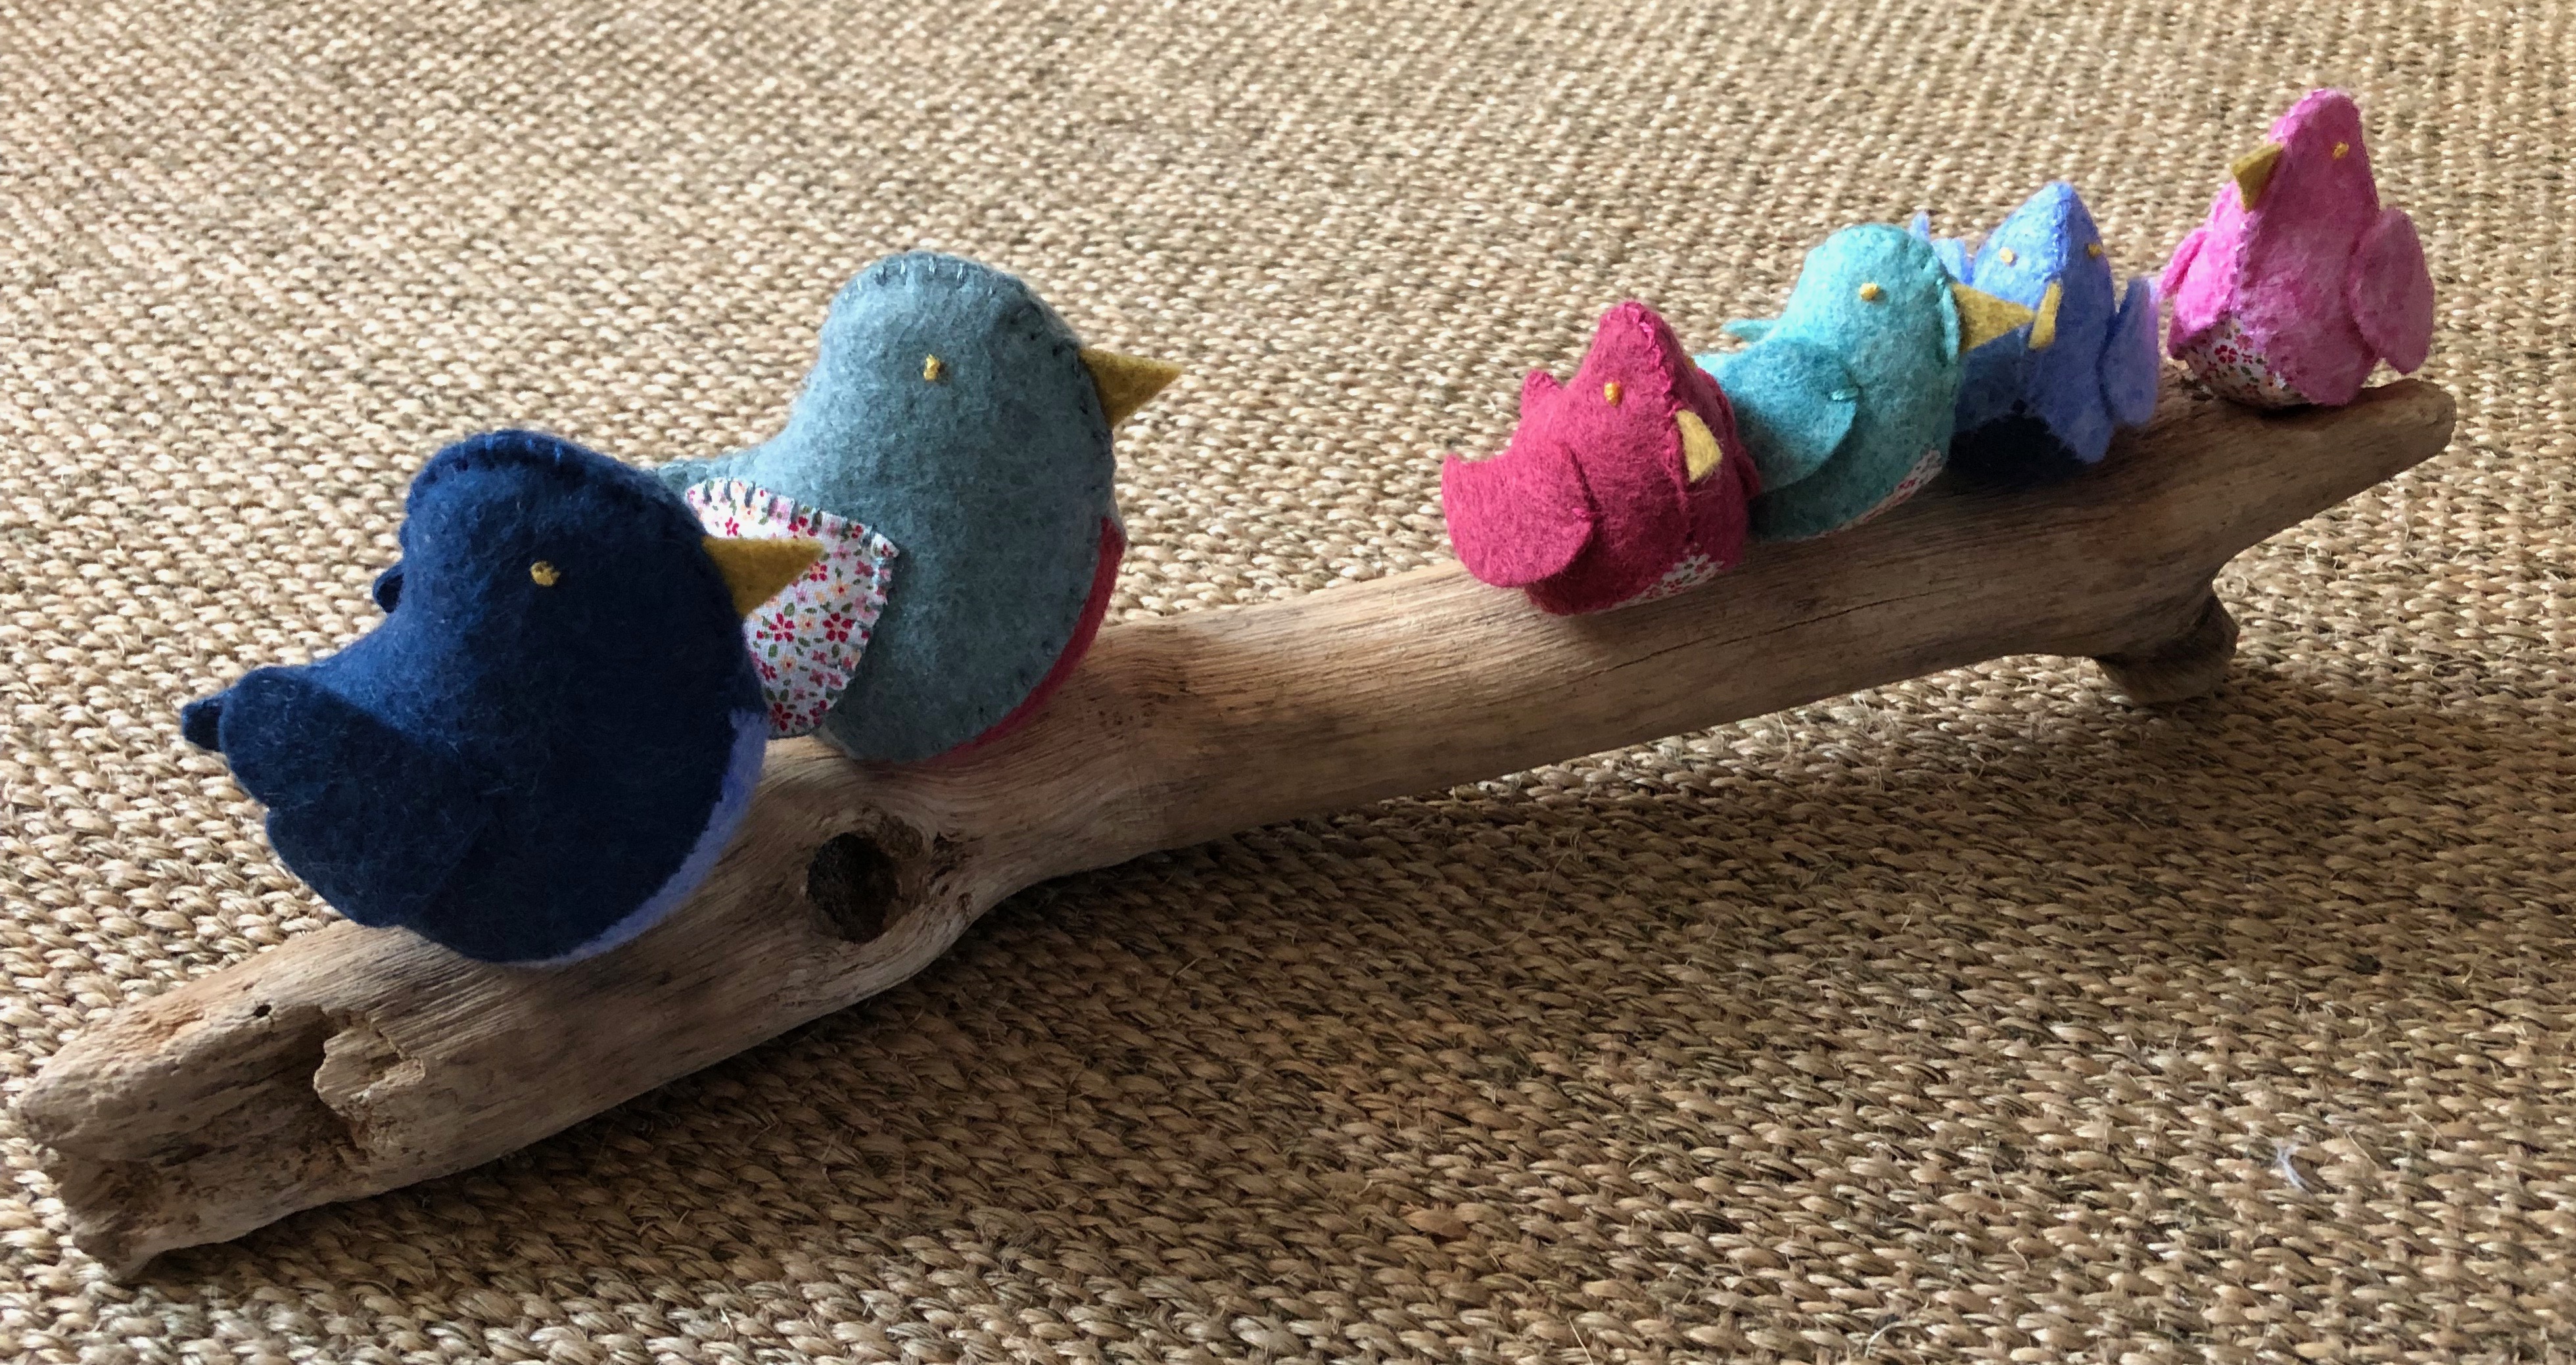 A family of 6 handmade and hand stitched felt and fabric birds sat on a drift wood log. Birds are made in a range of complimentary pastel shades of blue green and pink with tiny flower fabric chests or wings.